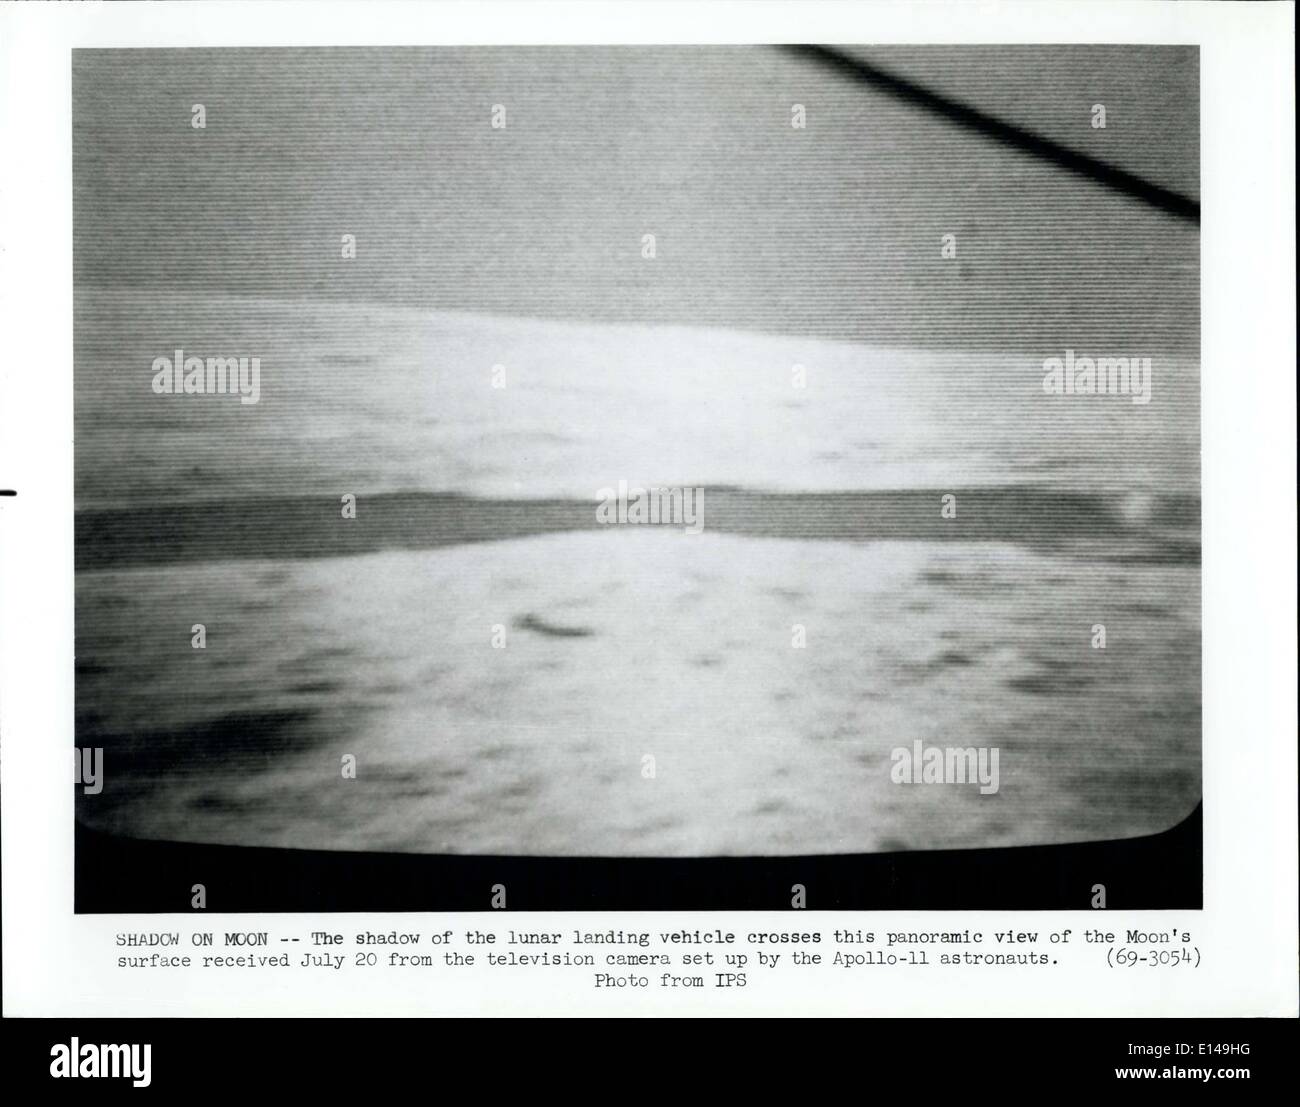 Apr. 17, 2012 - Shadow on Moon- The Shadow of the Lunar Landing vehicle crosses this Panoramic view of the Moon's surface received July 20 from the television Camera set up by the Apollo-11 Astronauts. Stock Photo